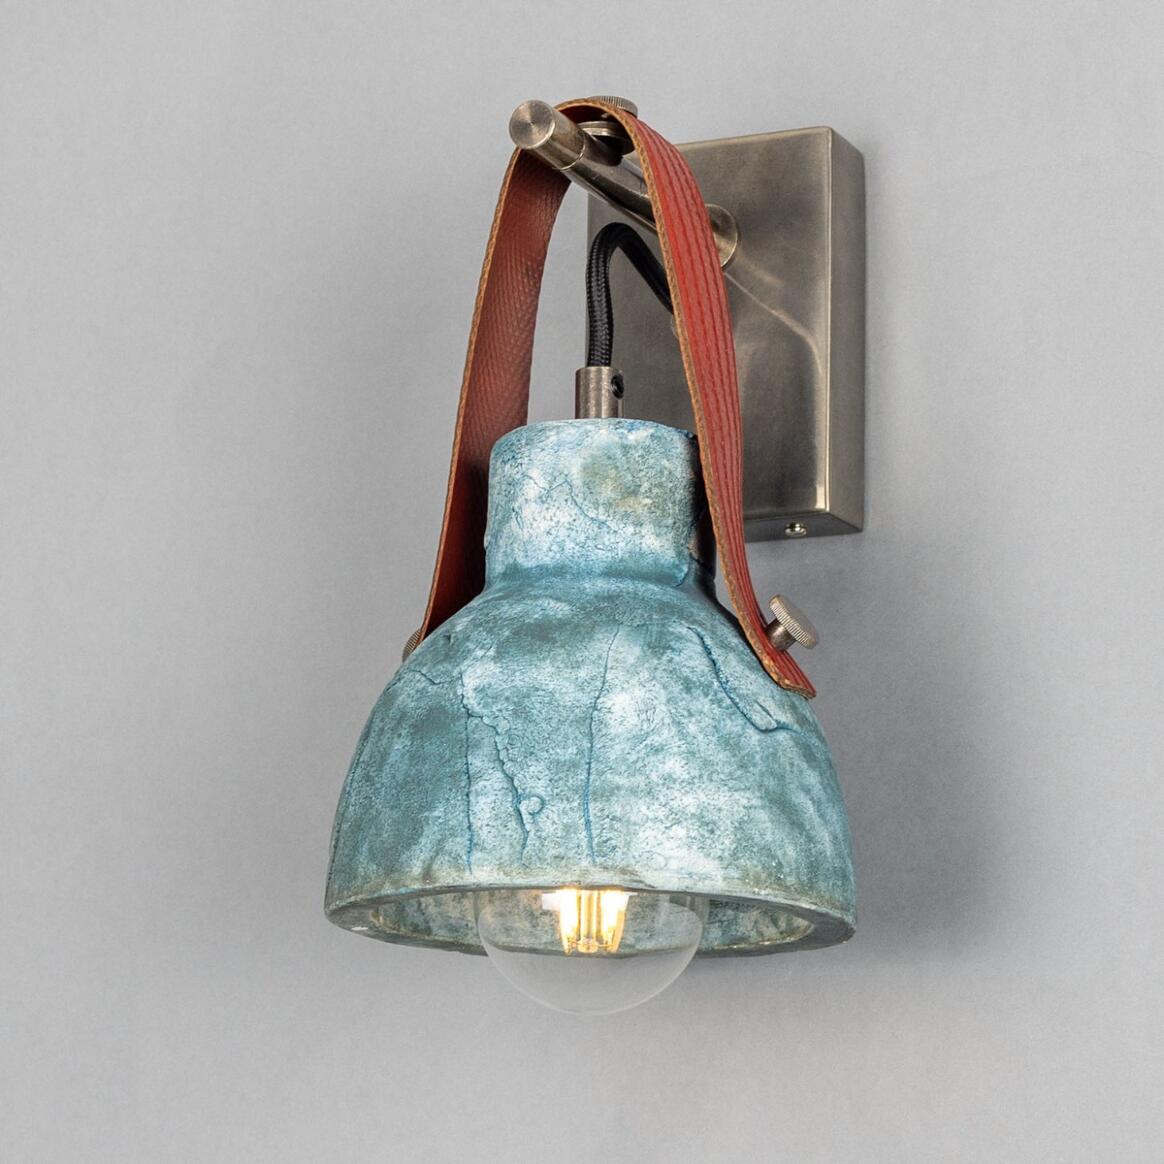 Nagi Organic Ceramic Wall Light with Rescued Fire-Hose Strap, Blue Earth main product image